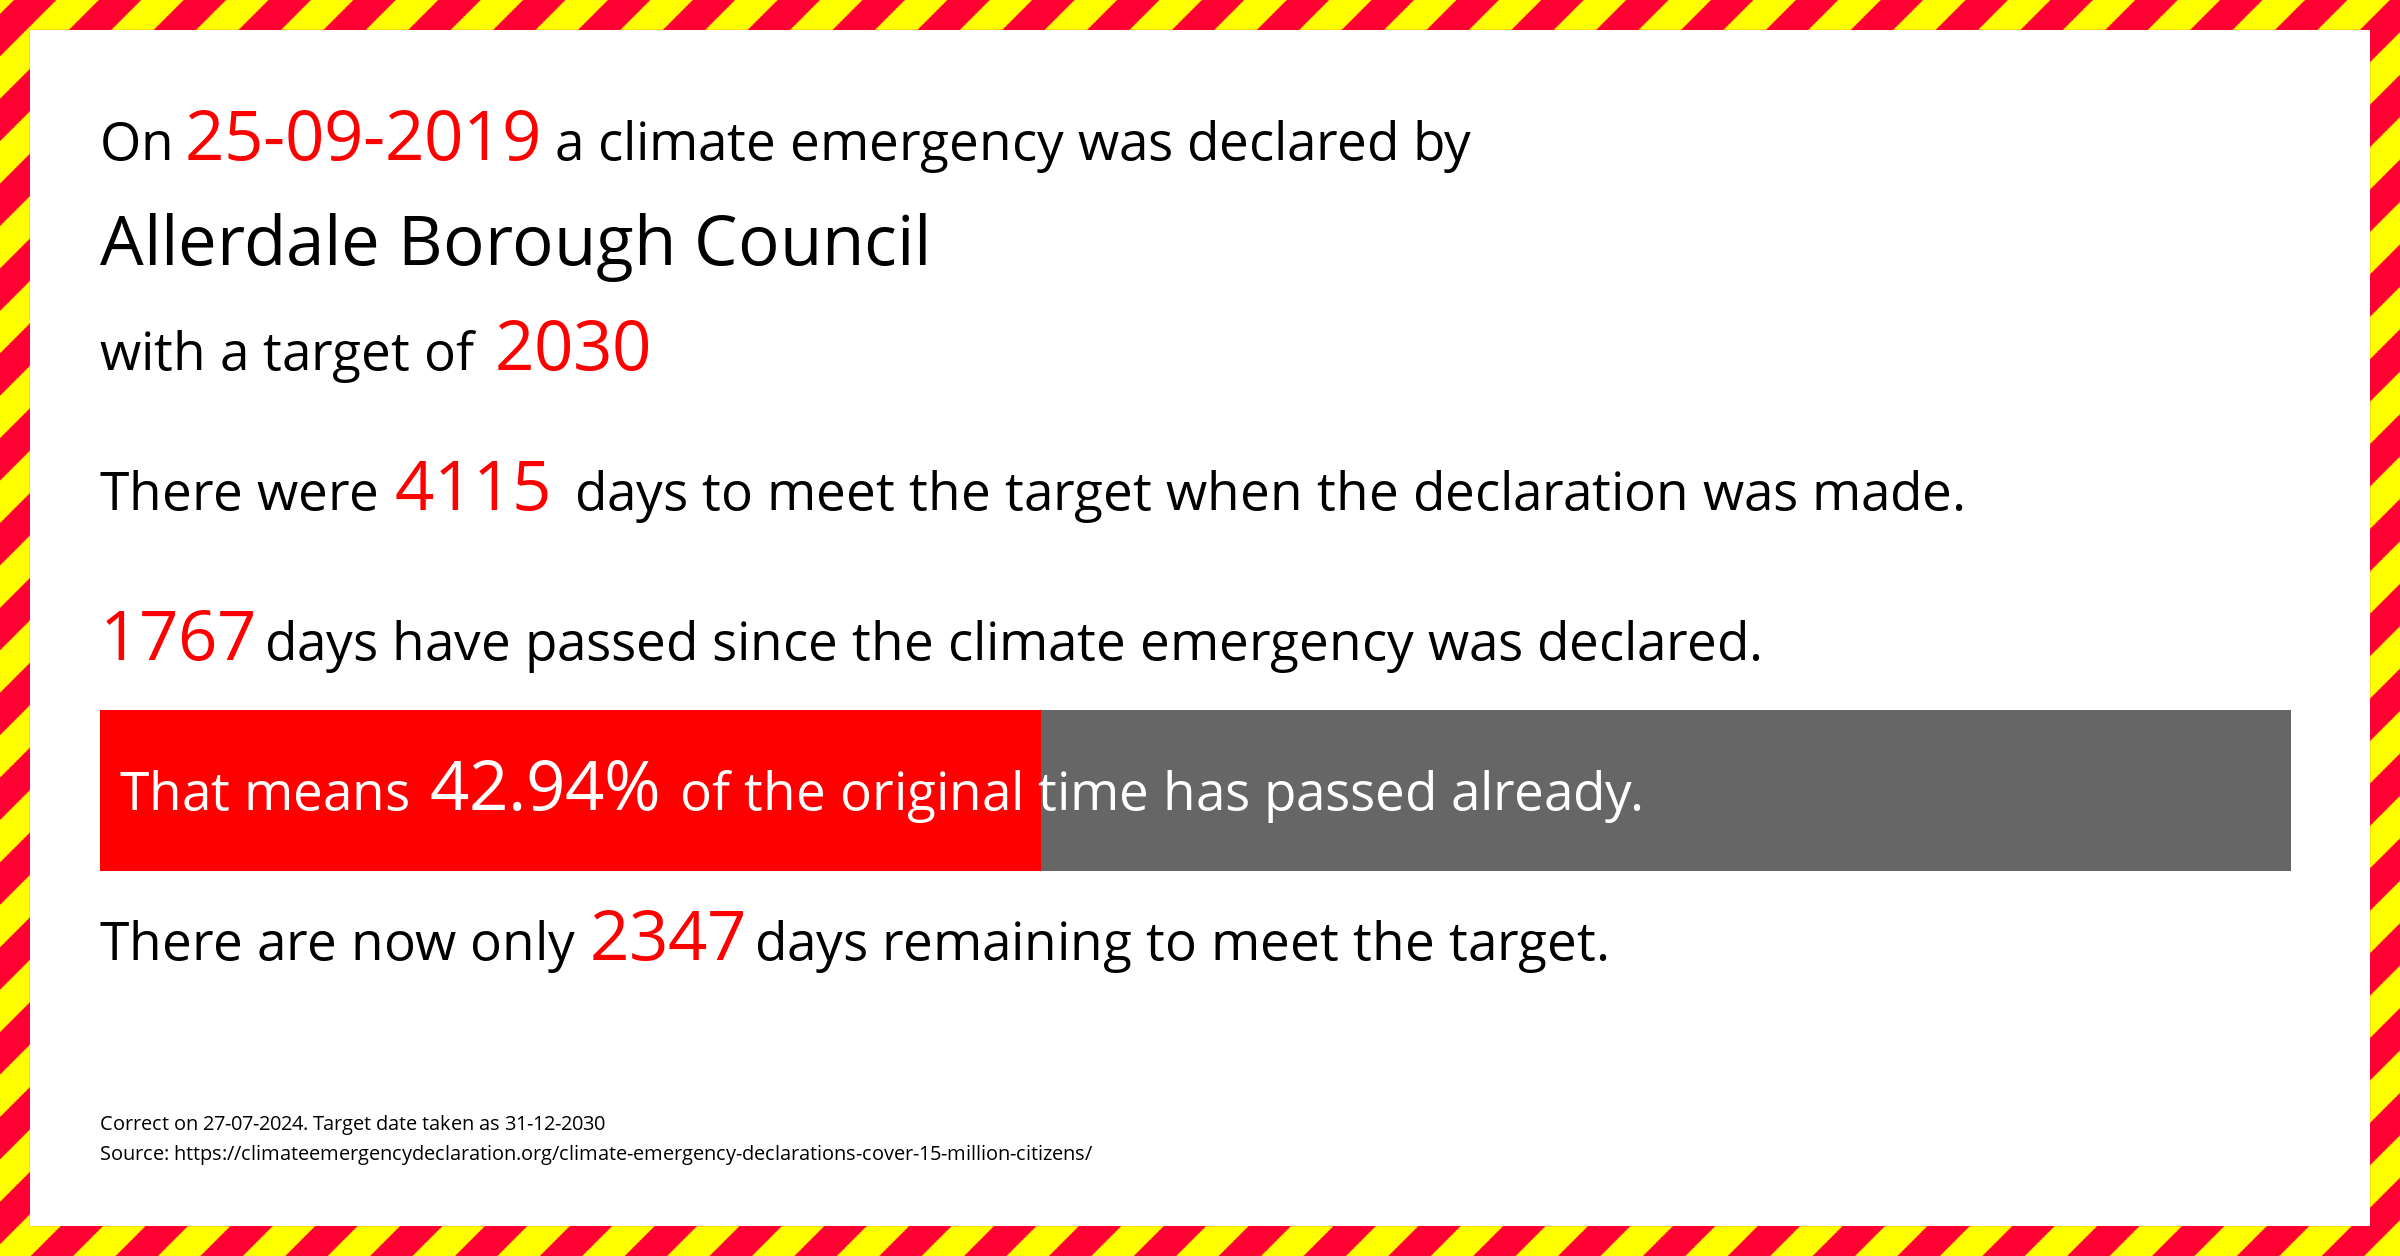 Allerdale Borough Council  declared a Climate emergency on Wednesday 25th September 2019, with a target of 2030.